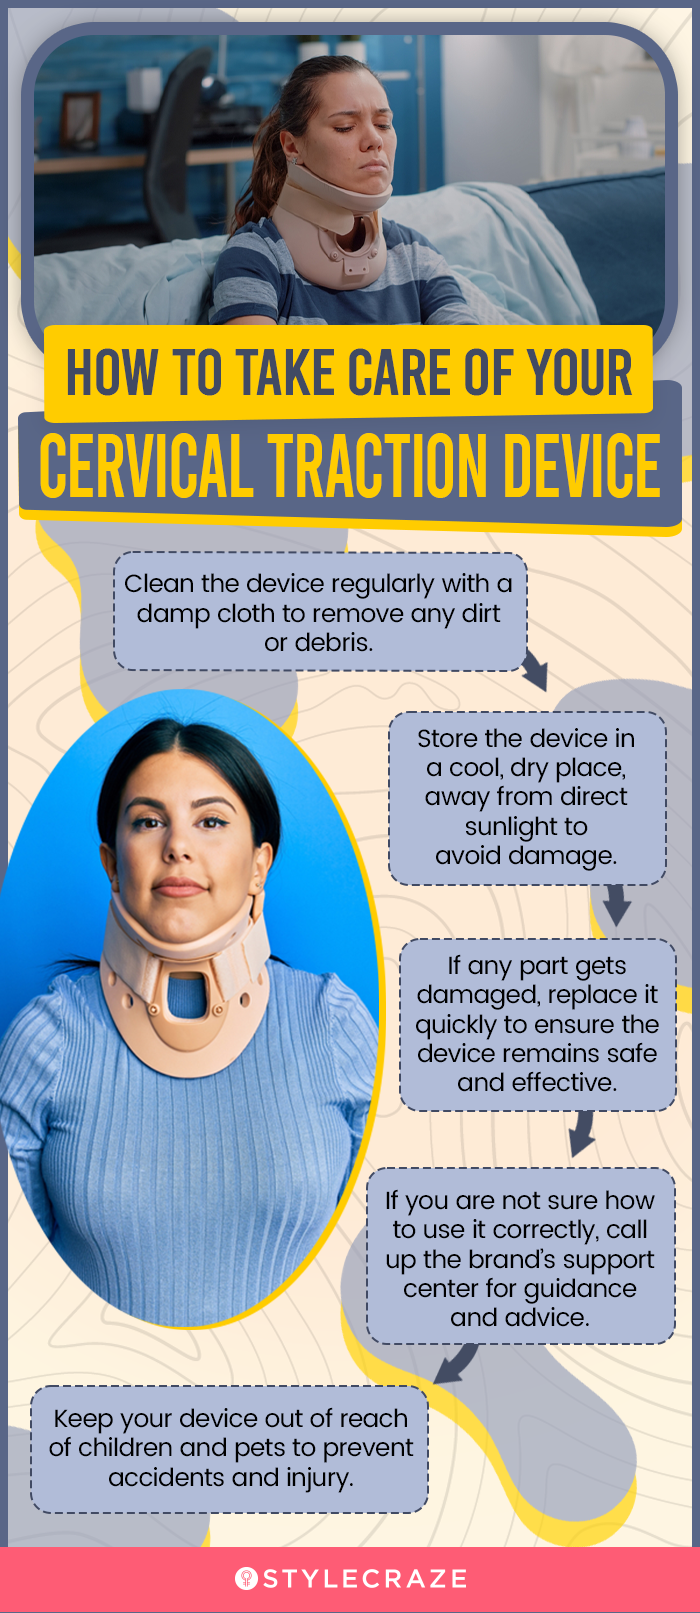 How To Take Care Of Your Cervical Traction Device (infographic)